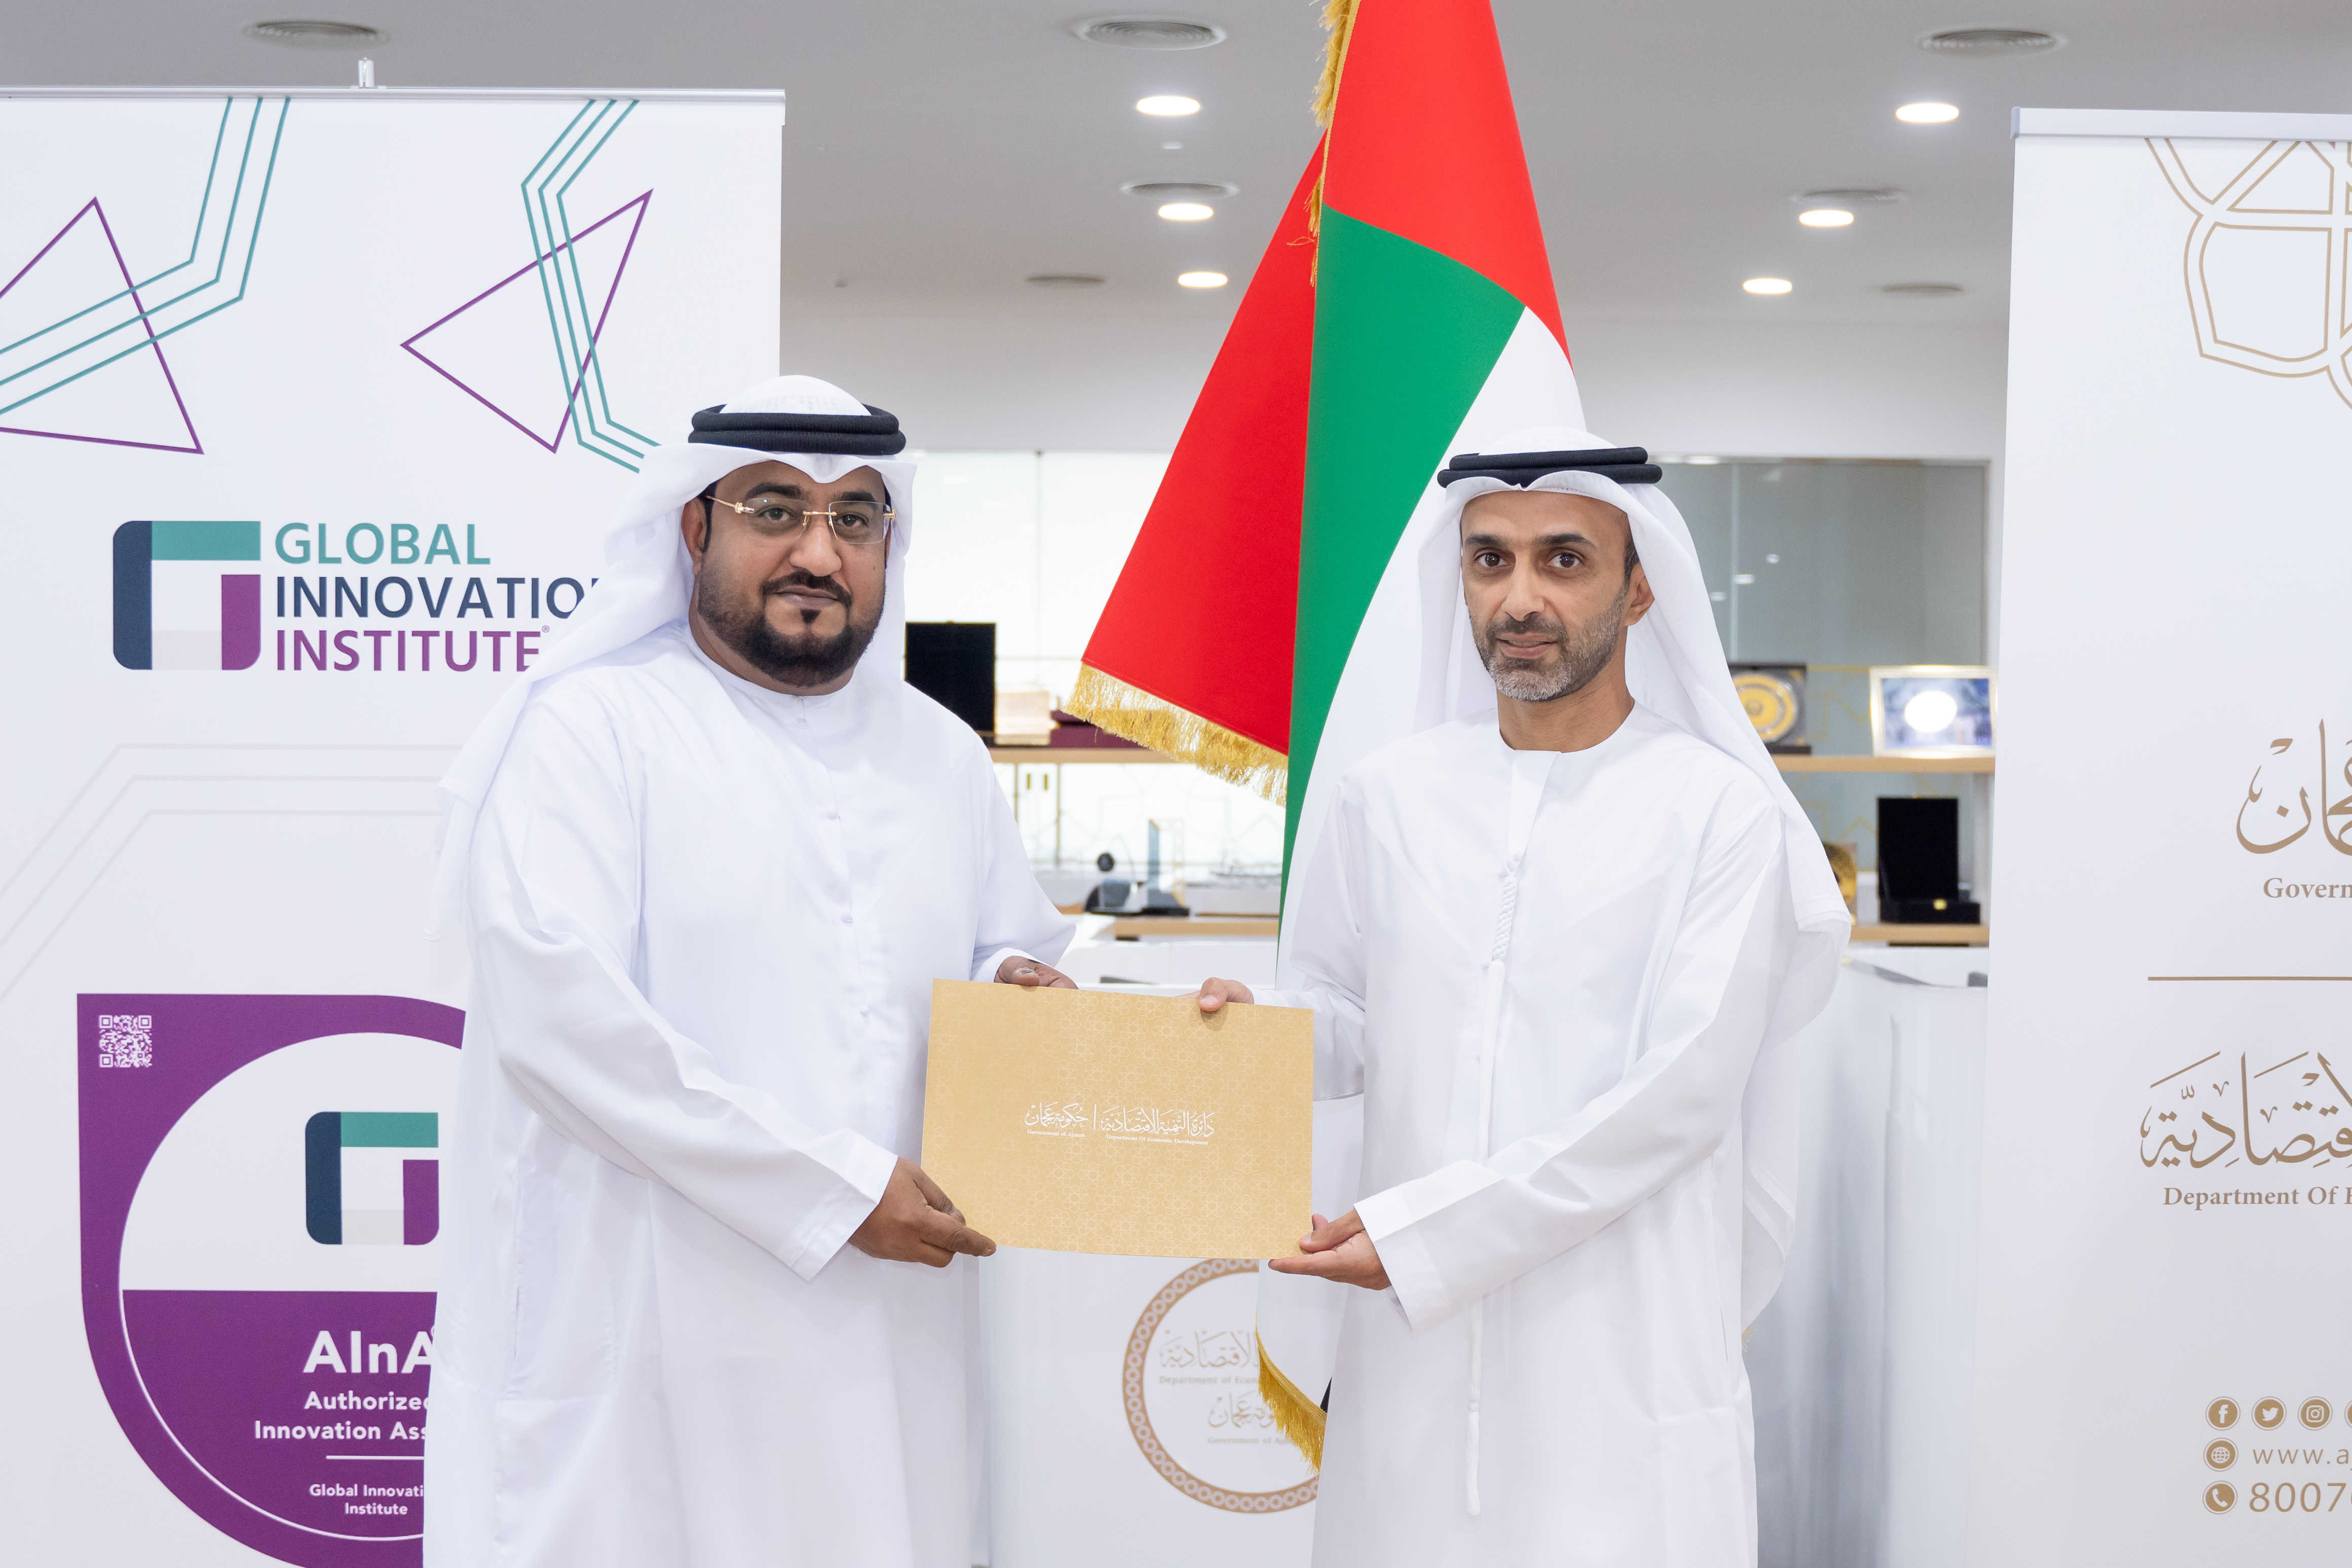 10 Ajman DED employees receive the “Accredited Innovation Assessor” degree from GInI Ahmed bin Humaid honors graduates of the “Accredited Innovation Assessor” of Ajman DED